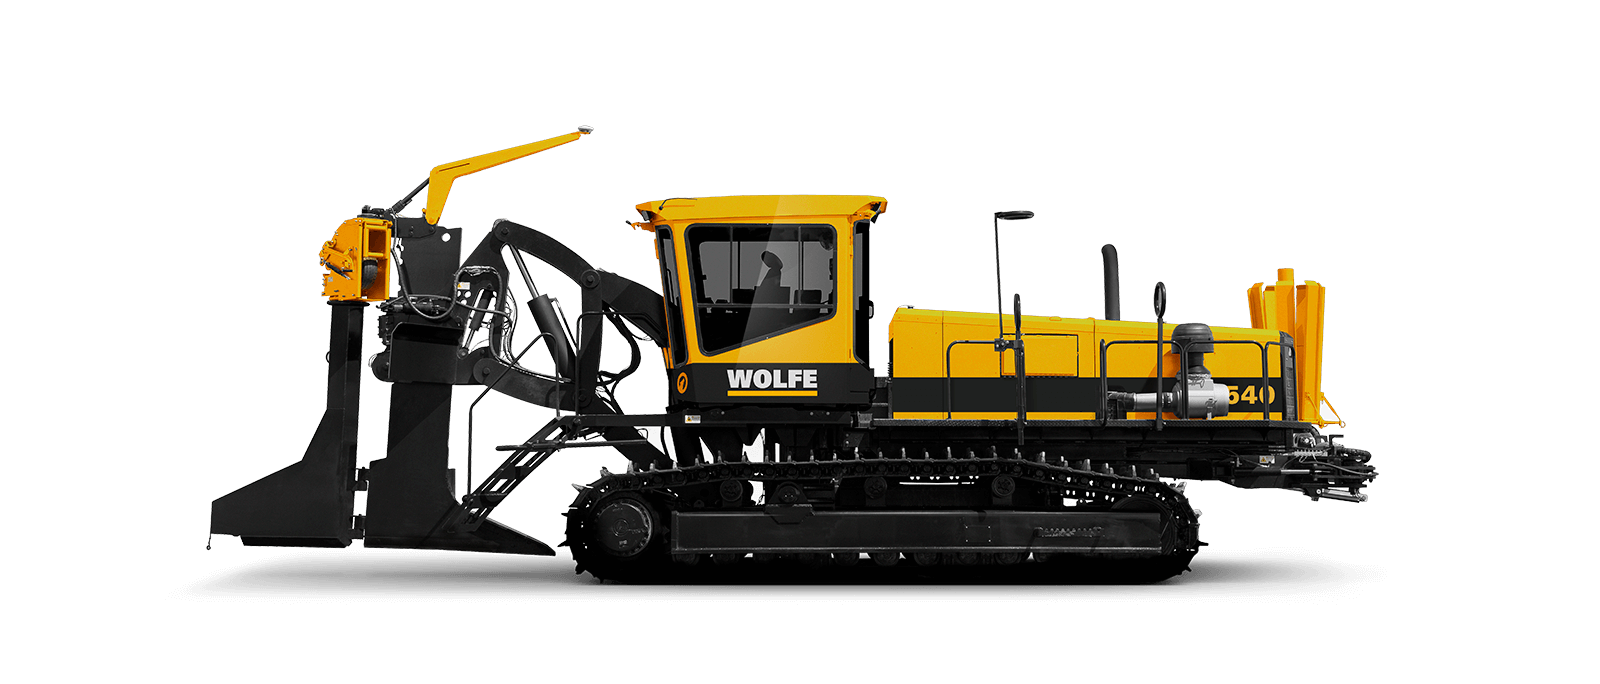 Heavy equipment, Construction Plow, Double Link Plow, high-quality equipment, Toughest conditions, Proven performance